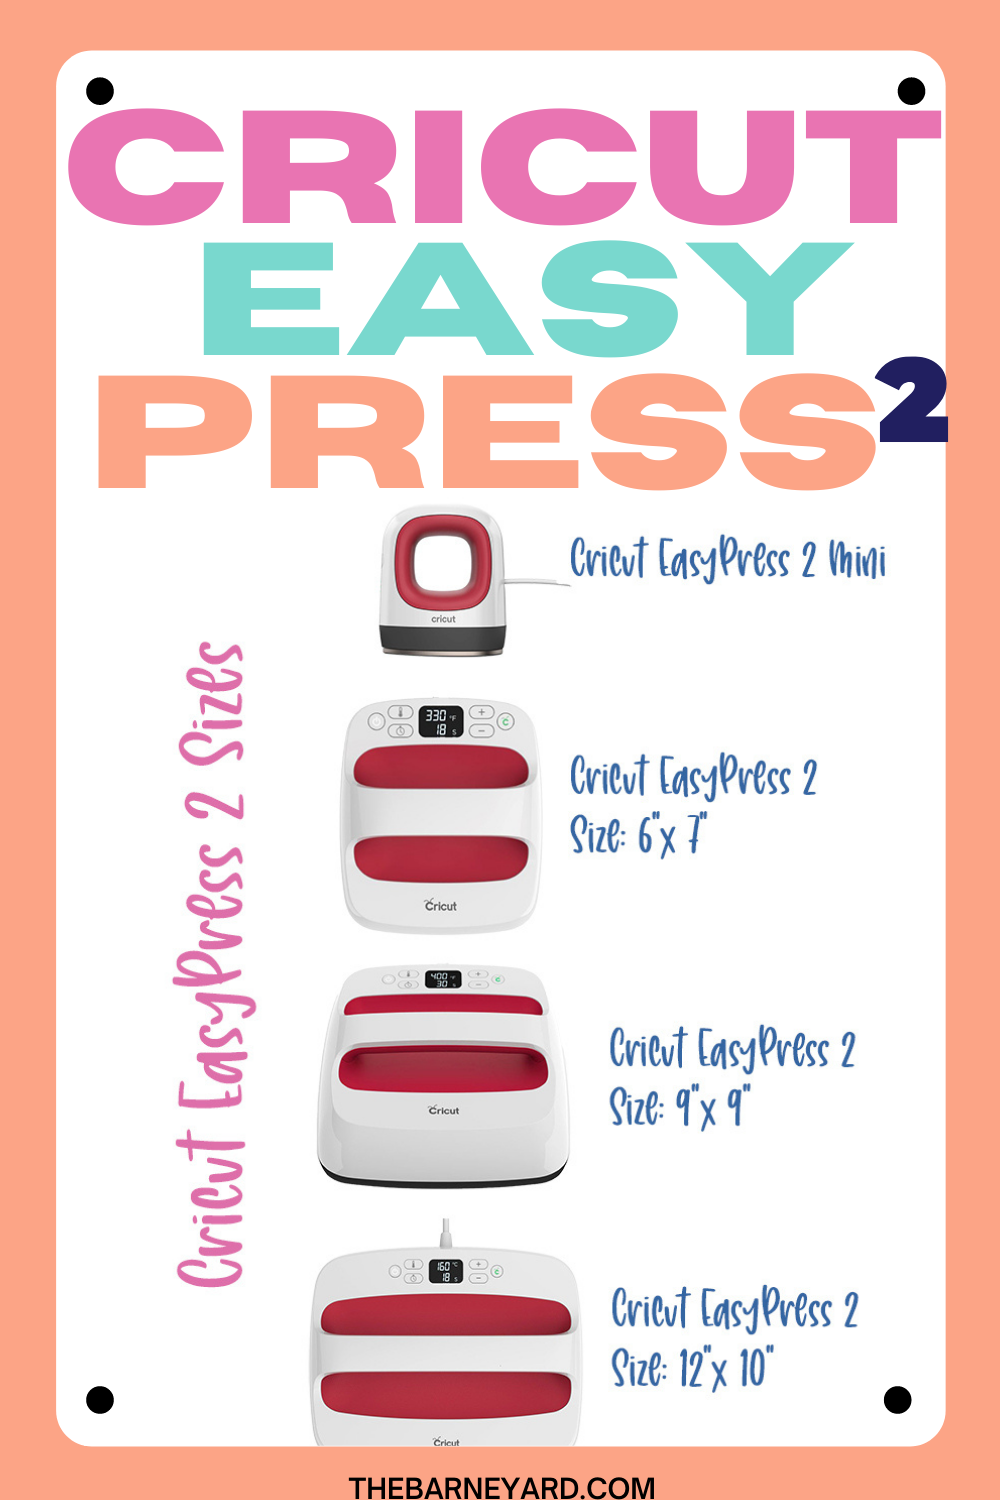 Which Cricut EasyPress 2 sizes are right for you? – Cricut